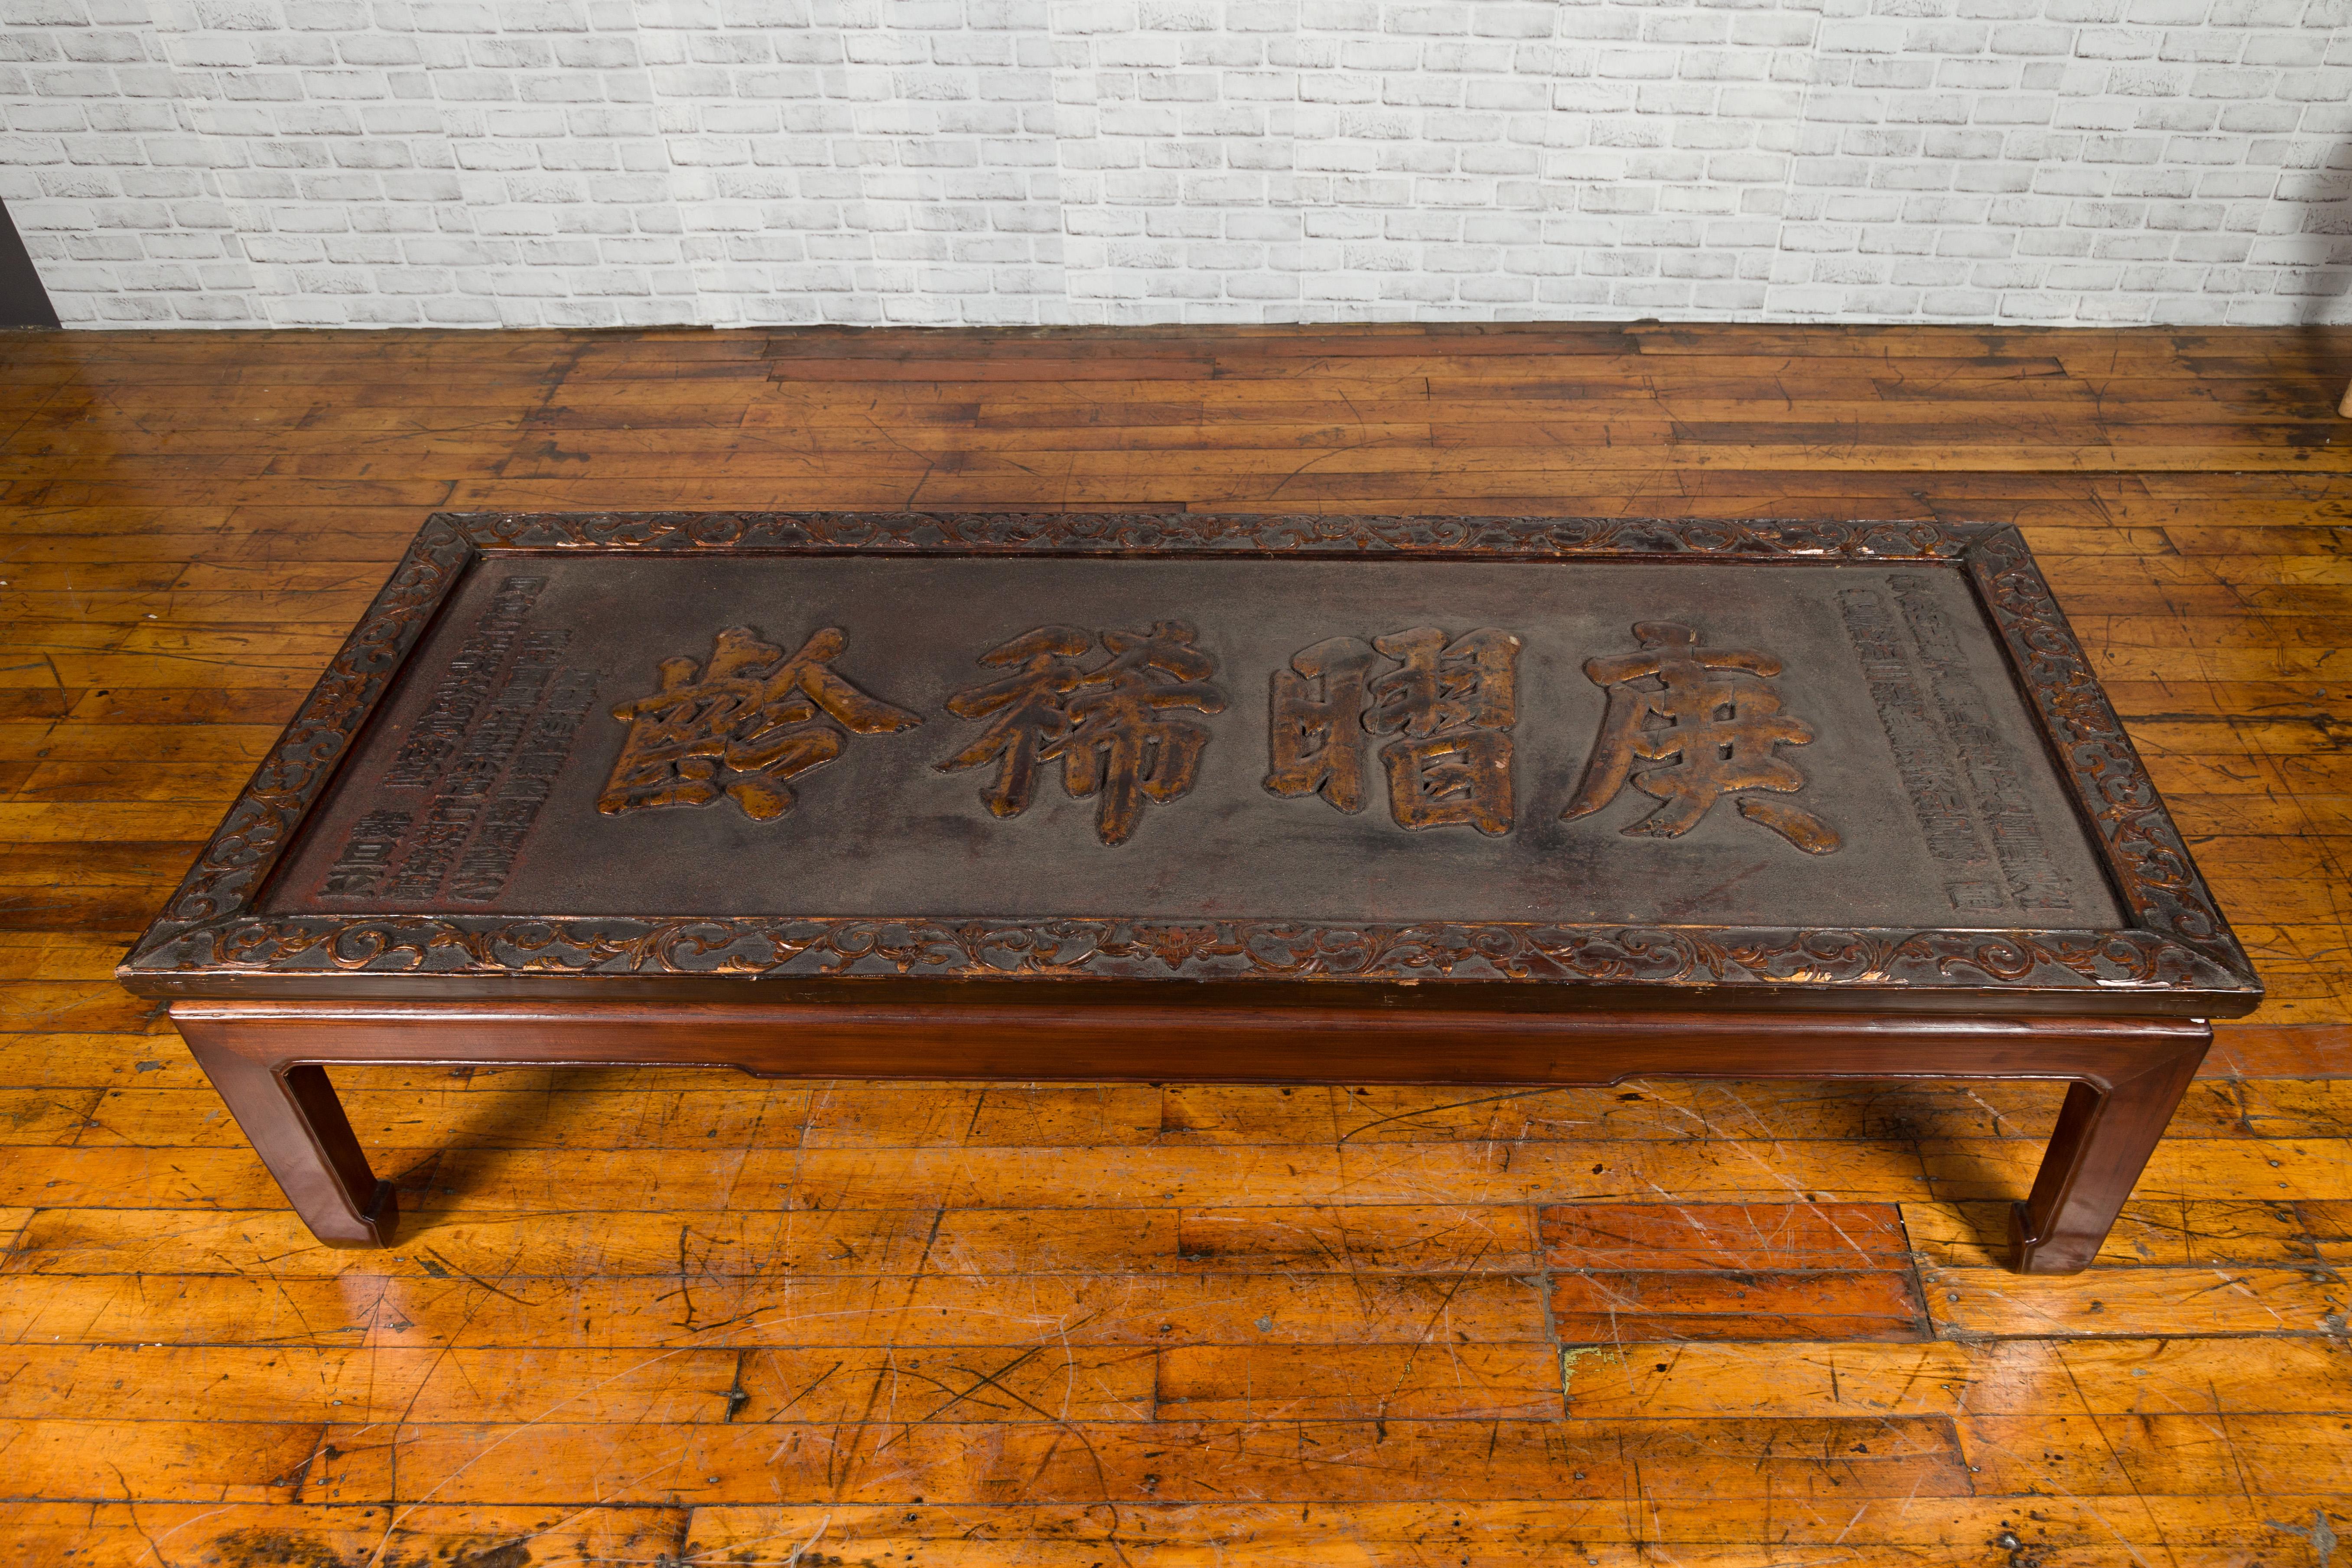 Chinese Qing Dynasty Period Shop Sign with Calligraphy Made into a Coffee Table In Good Condition For Sale In Yonkers, NY